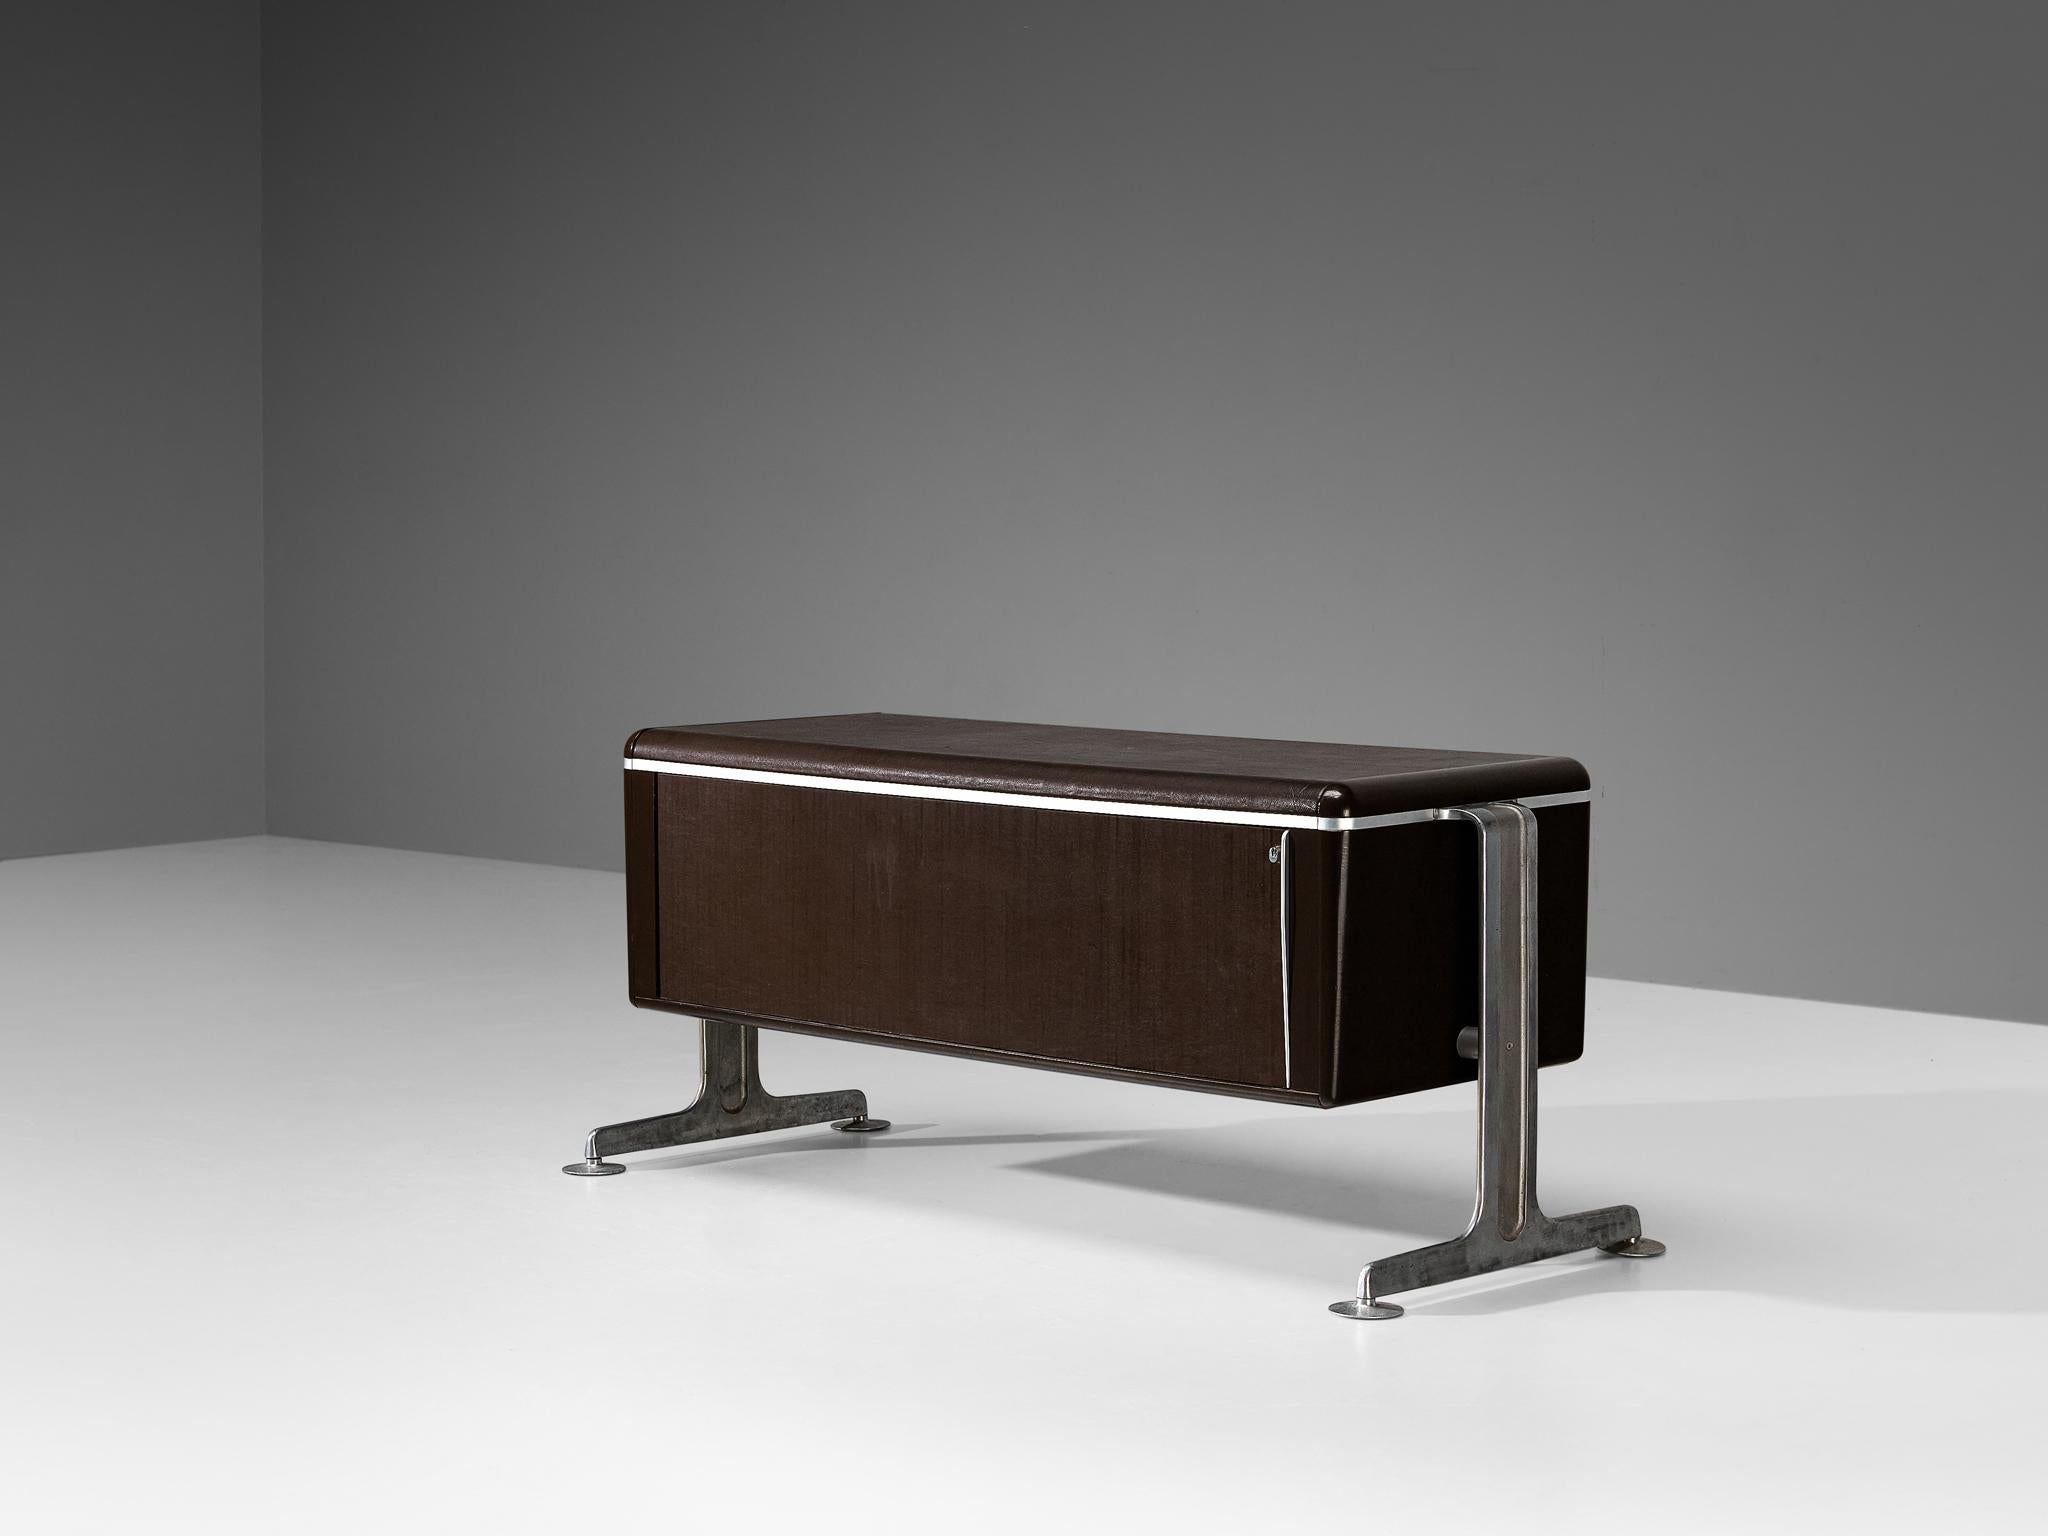 Alex Linder, sideboard, leather, aluminum, lacquered frame, laminate, Denmark, 1970s

This rare cabinet embodies a minimalist aesthetic, characterized by its straightforward design with streamlined contours, basic geometric forms, and sober color